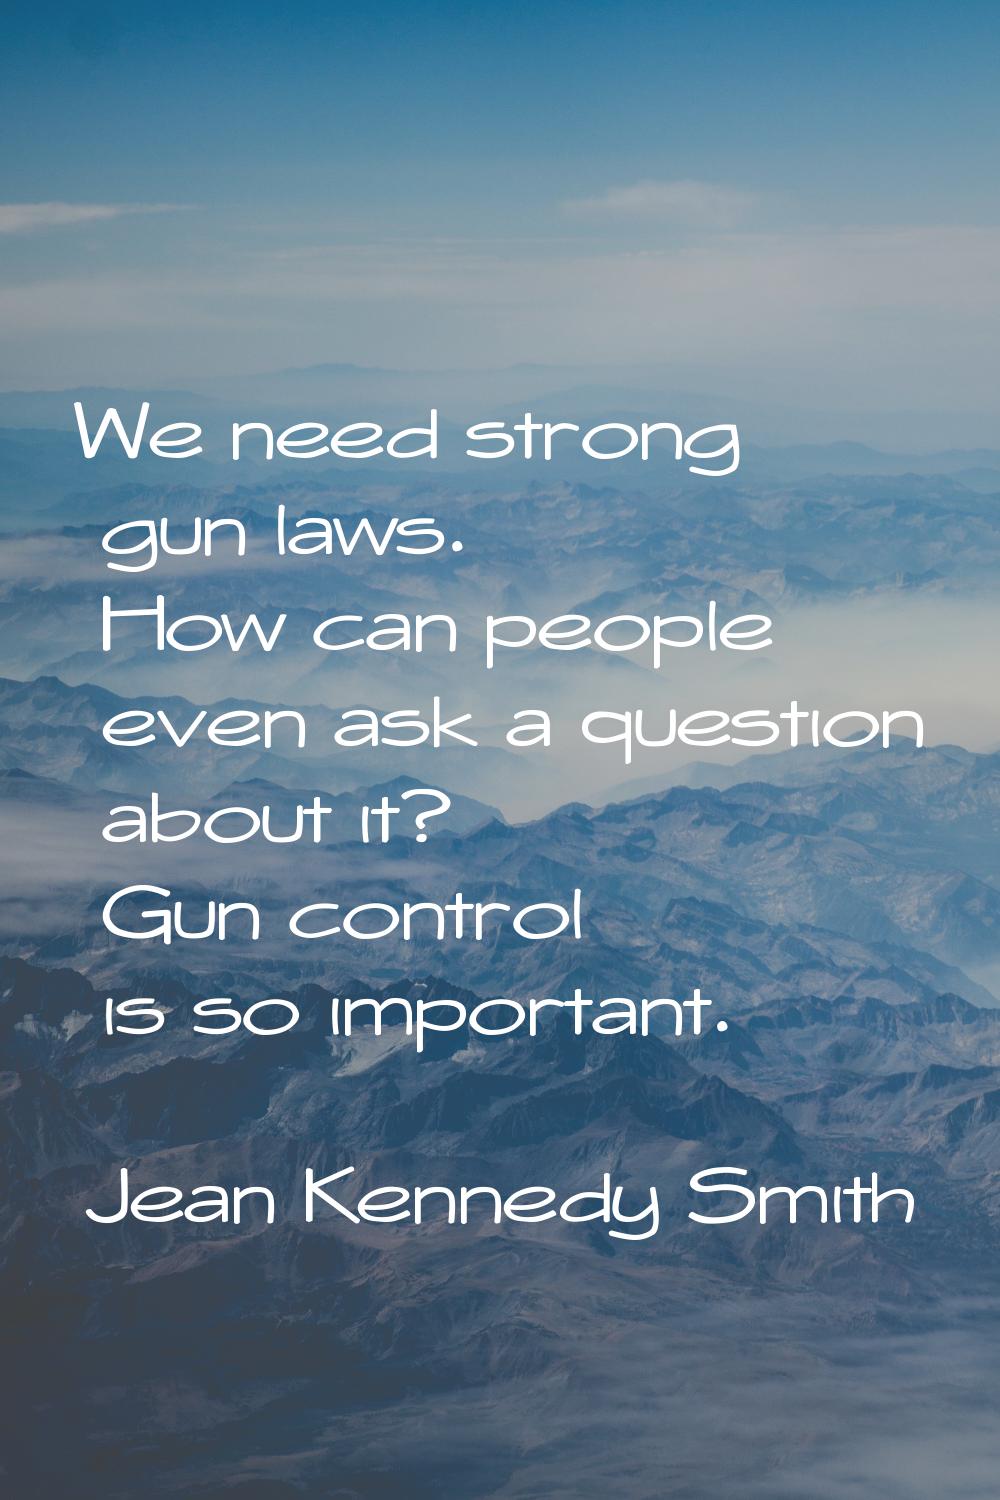 We need strong gun laws. How can people even ask a question about it? Gun control is so important.